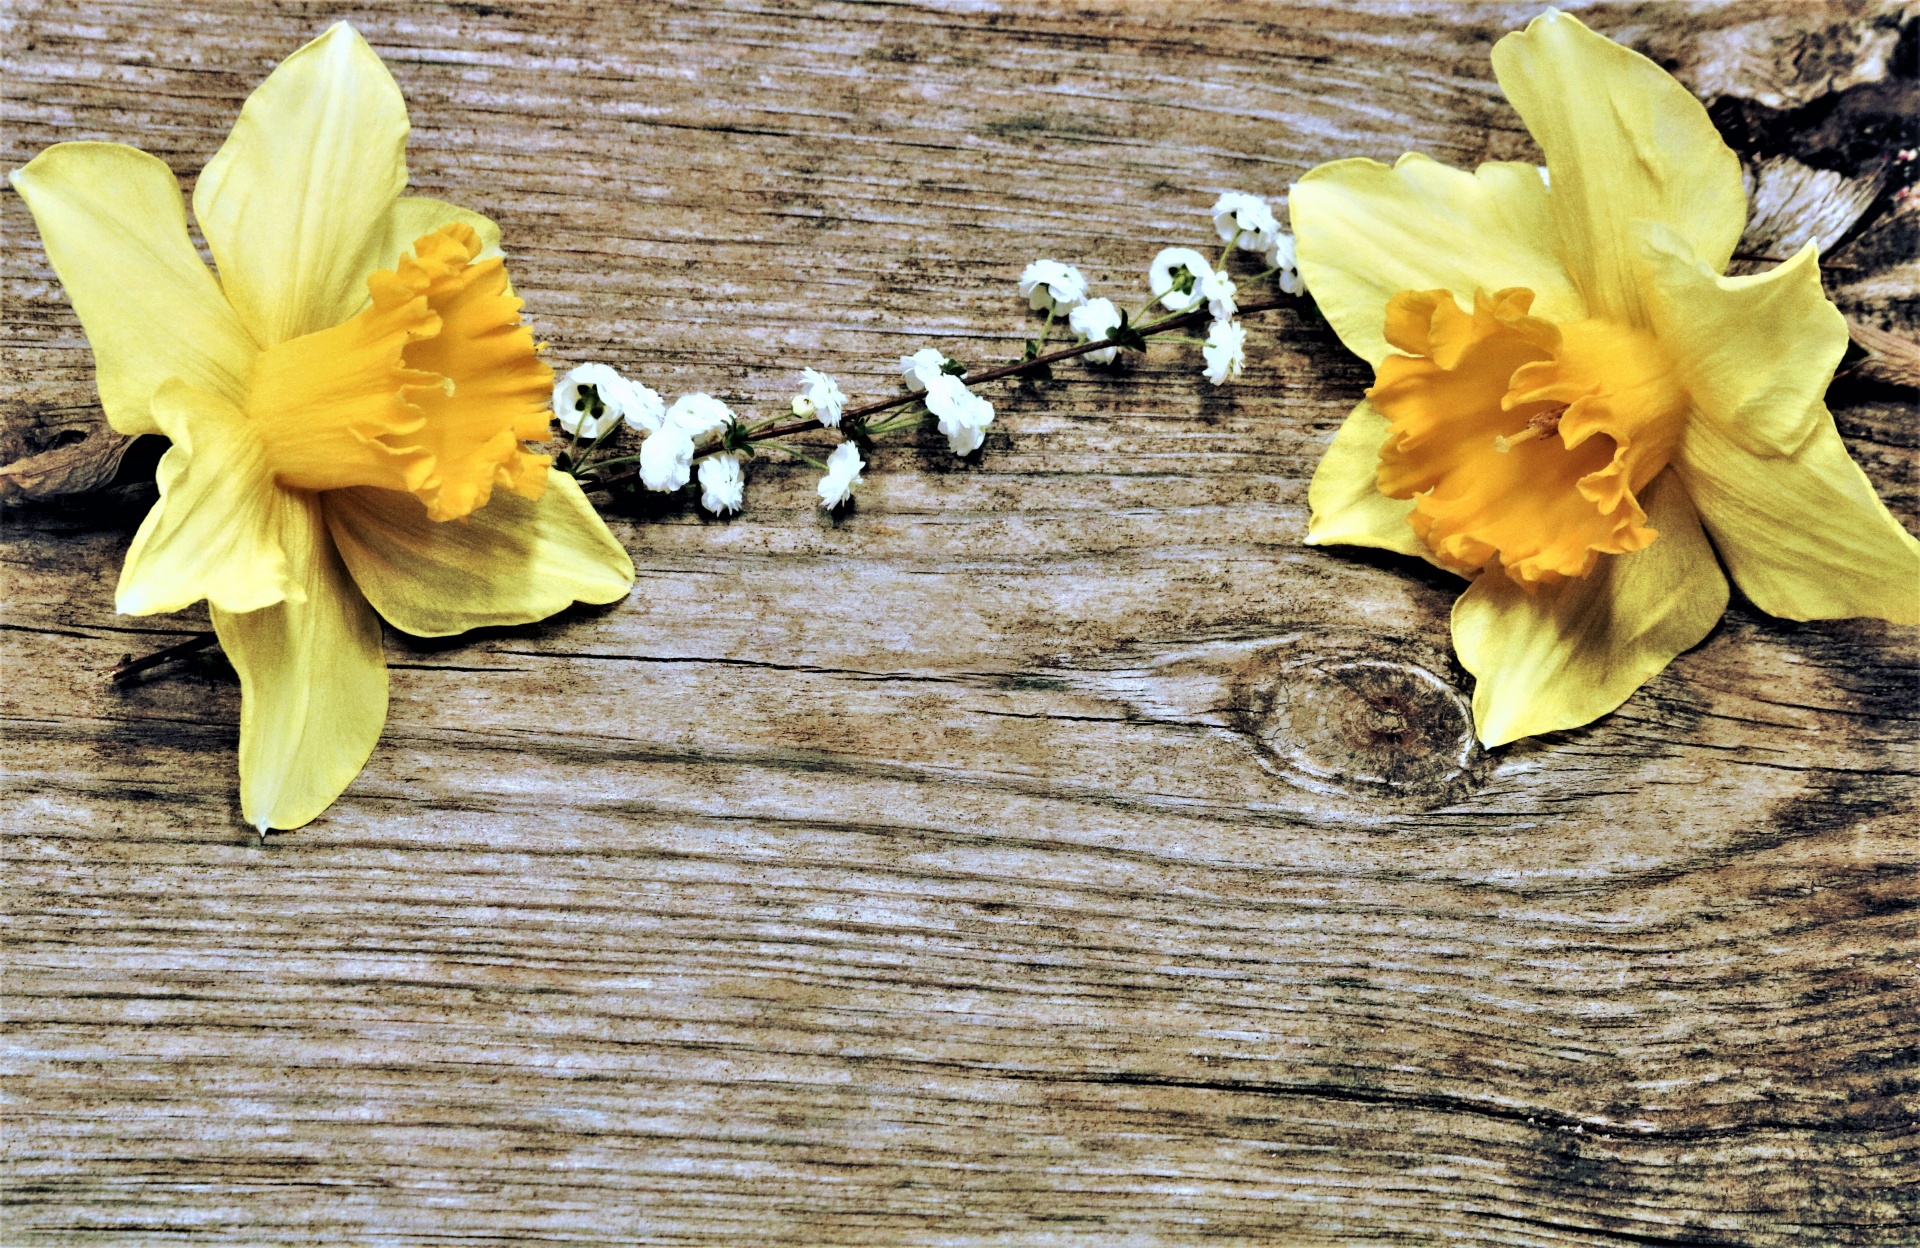 Two bright yellow daffodils and a sprig of white spring flowers on a weathered wooden background create a rustic background for text.